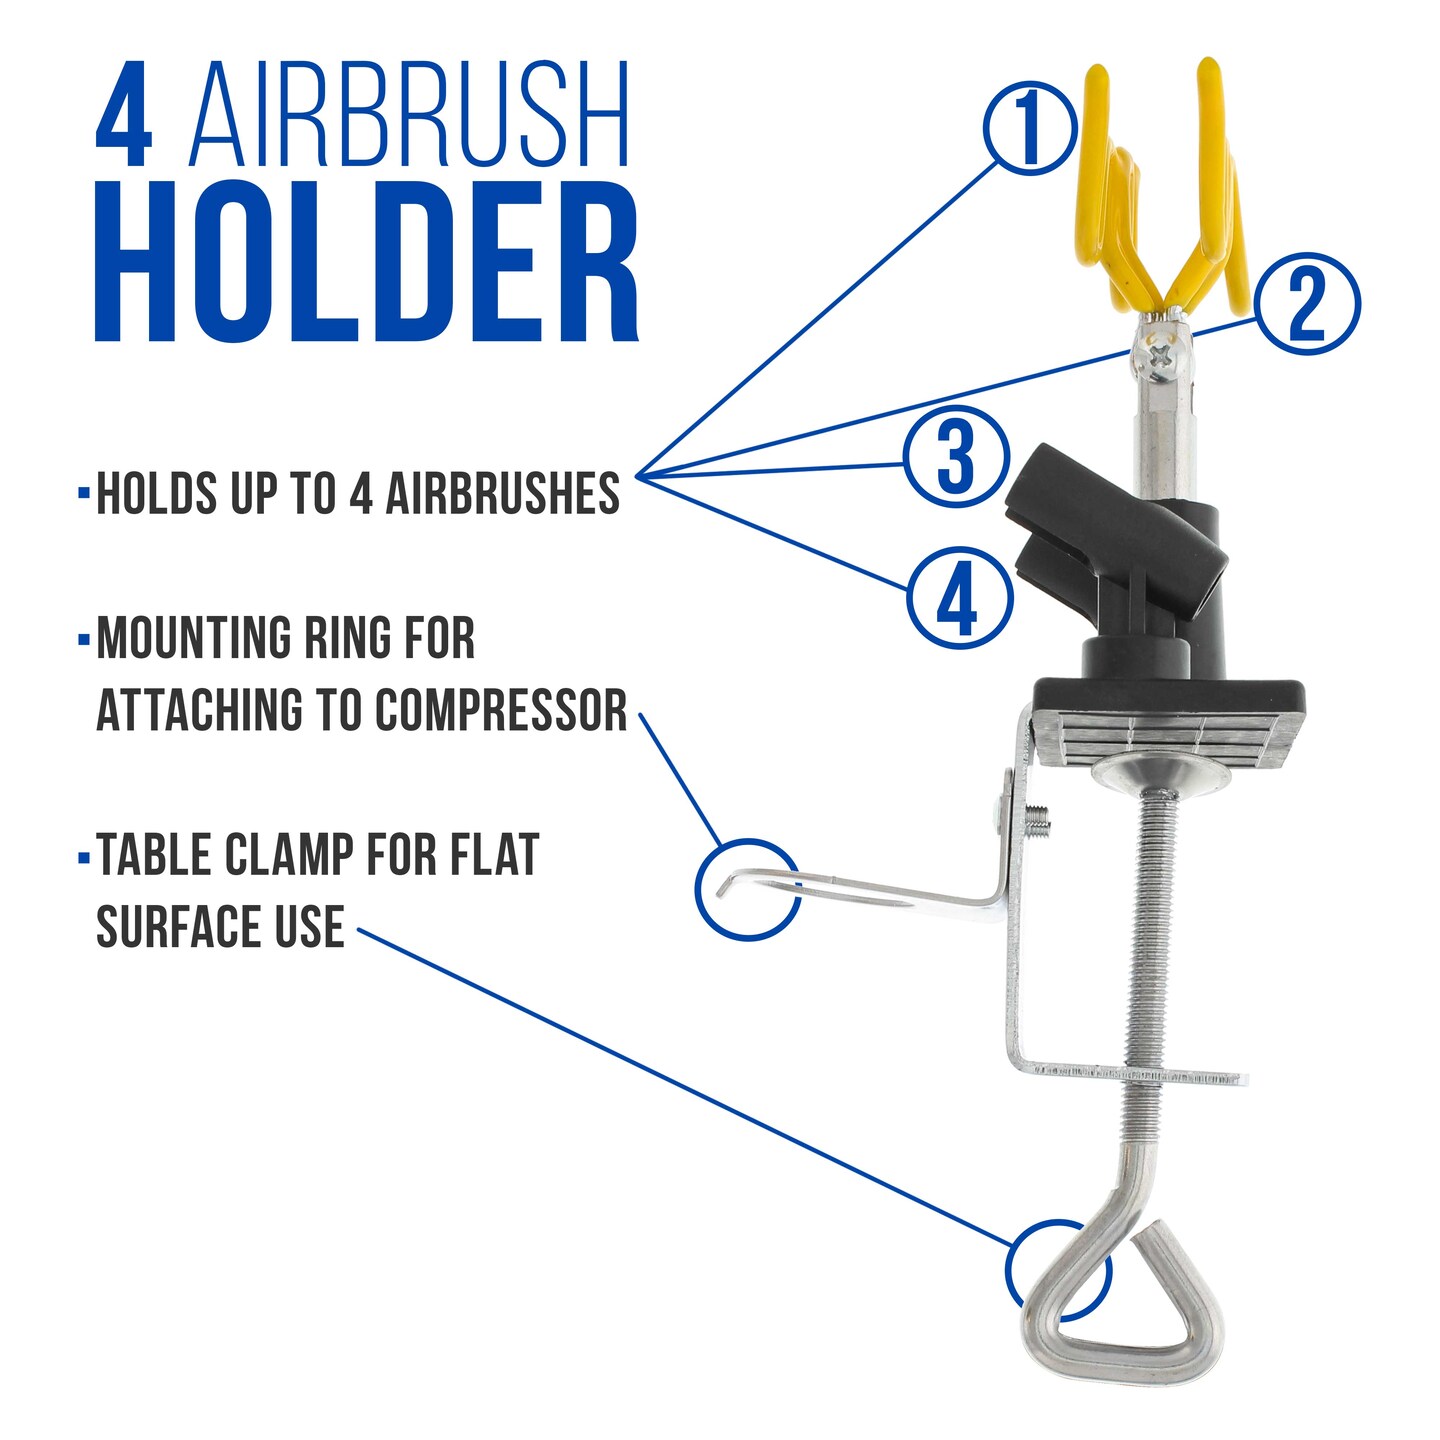 3 Master Airbrush Professional Multi-Purpose Airbrushing System Kit - G22,  S68, E91 Gravity & Siphon Feed Airbrushes, Hose, Air Compressor, Universal